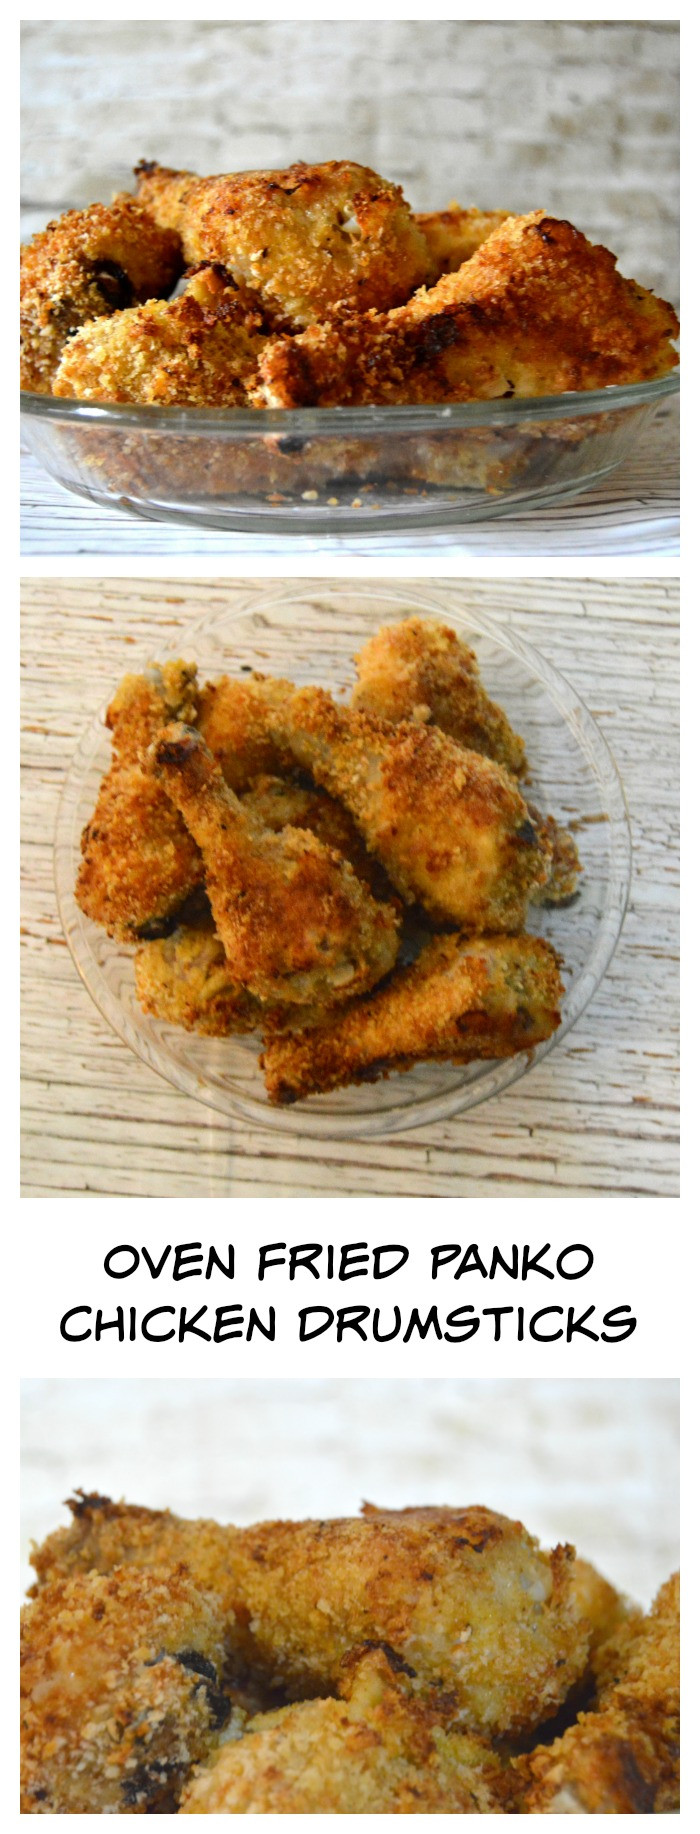 Simple Oven Fried Chicken
 Easy Panko Crusted Oven Fried Chicken Drumsticks Moola